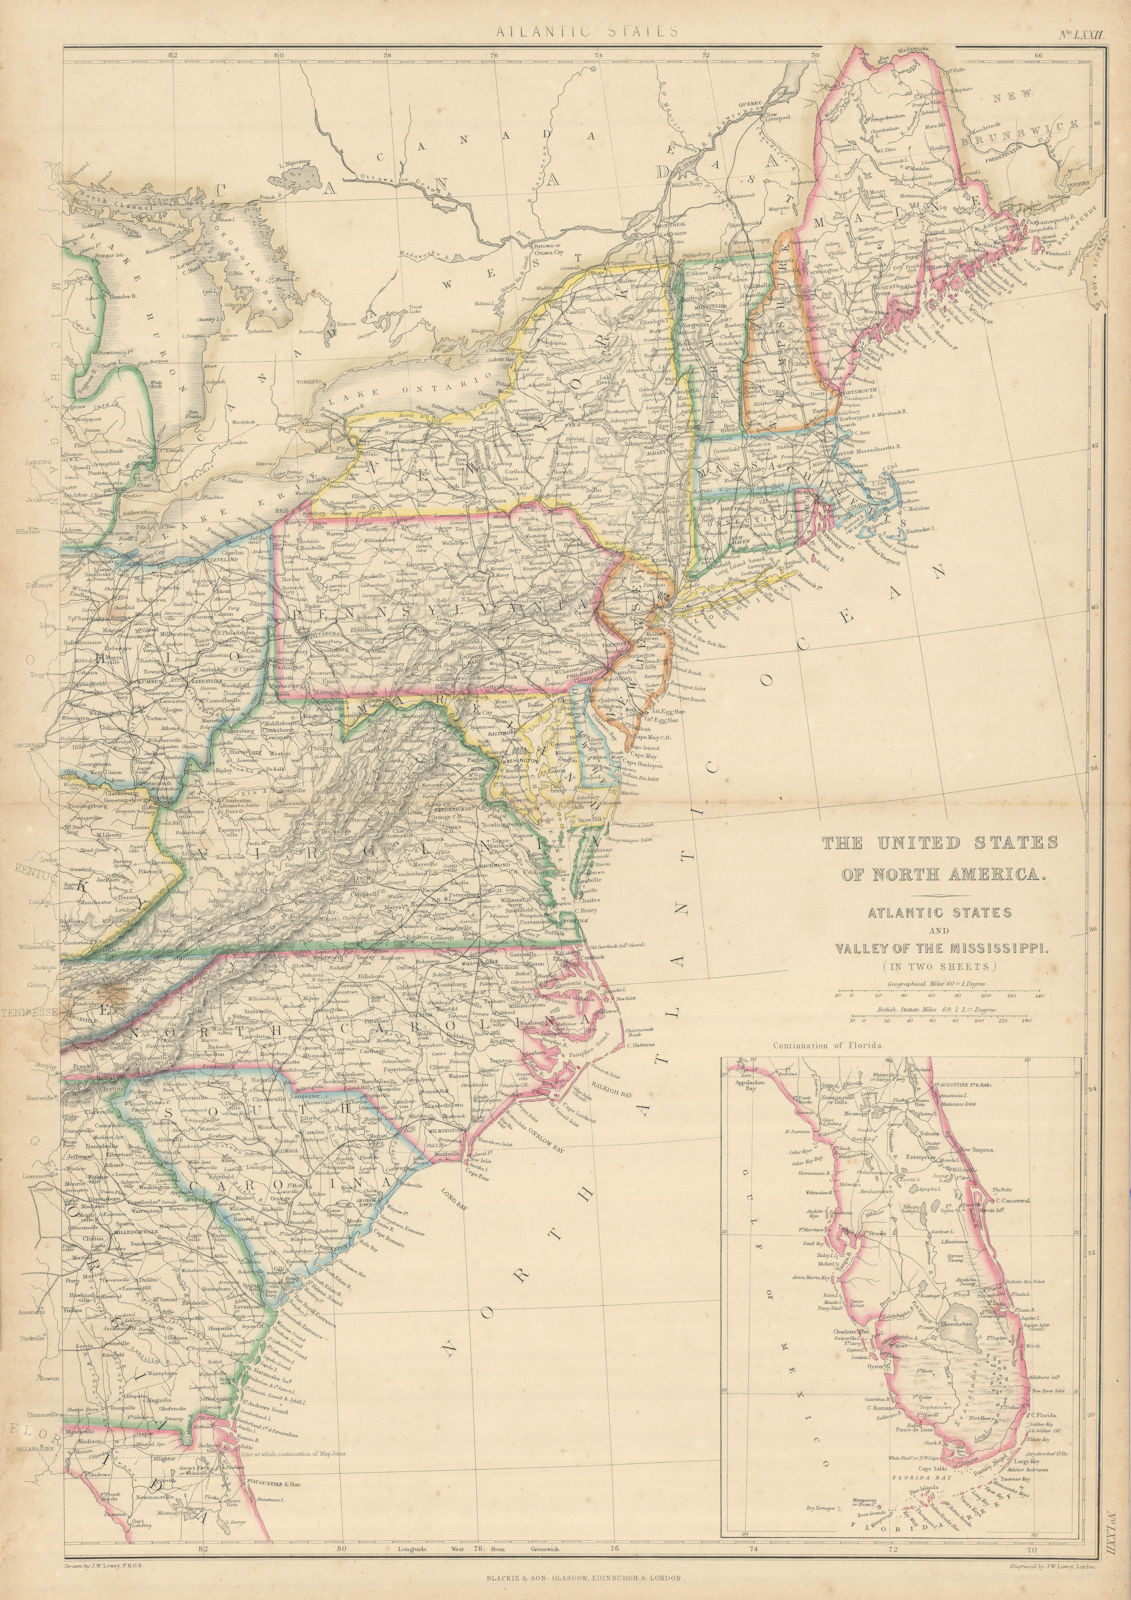 Associate Product The United States of North America. USA Atlantic States. LOWRY 1860 old map